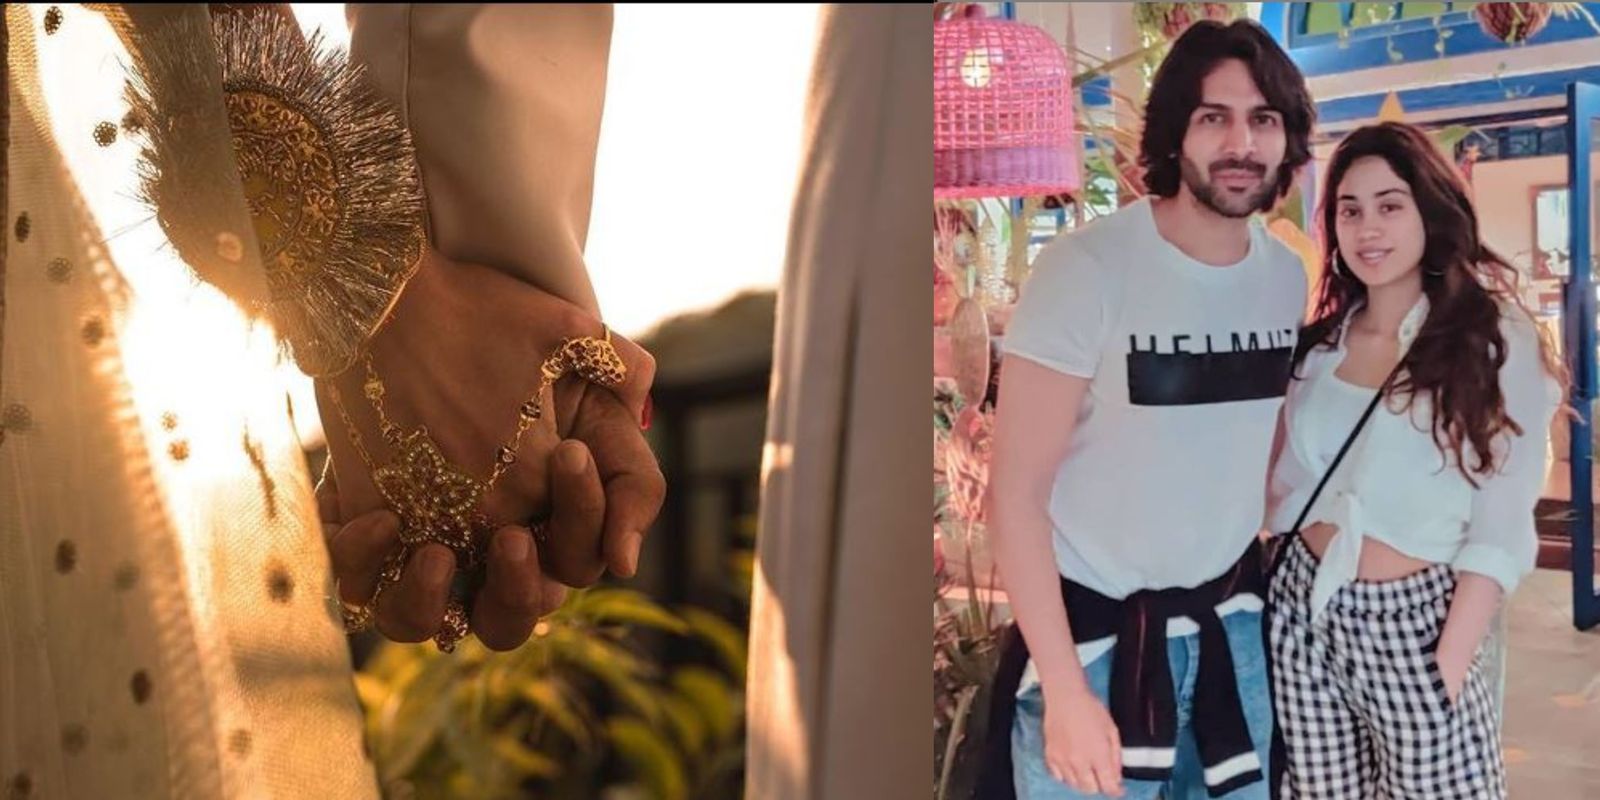 Ali Abbas Zafar Gets Married, Kartik Aaryan-Janhvi Kapoor's Picture Together From Goa Sparks Dating Rumours; See Posts